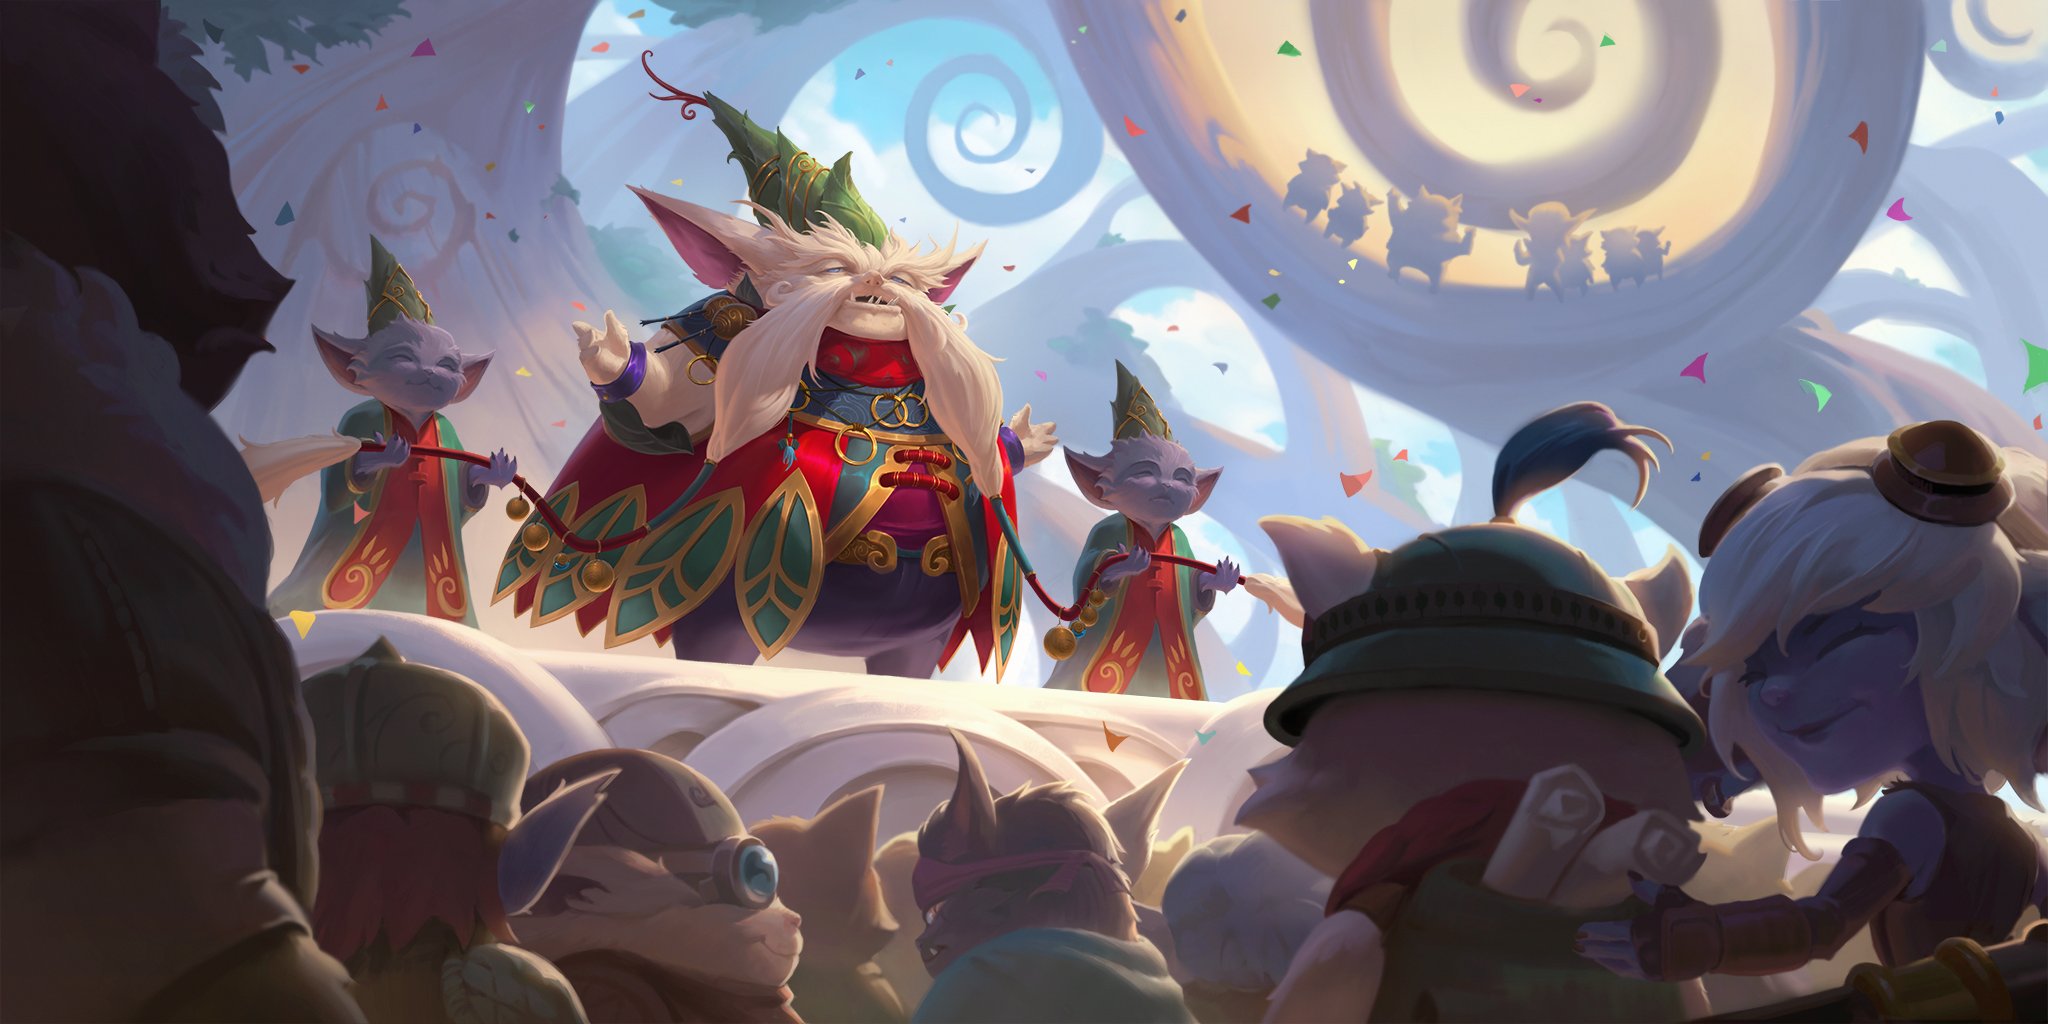 The Yordle mayor is standing in front of the crowd. He is noticeably bigger and has a long white beard.